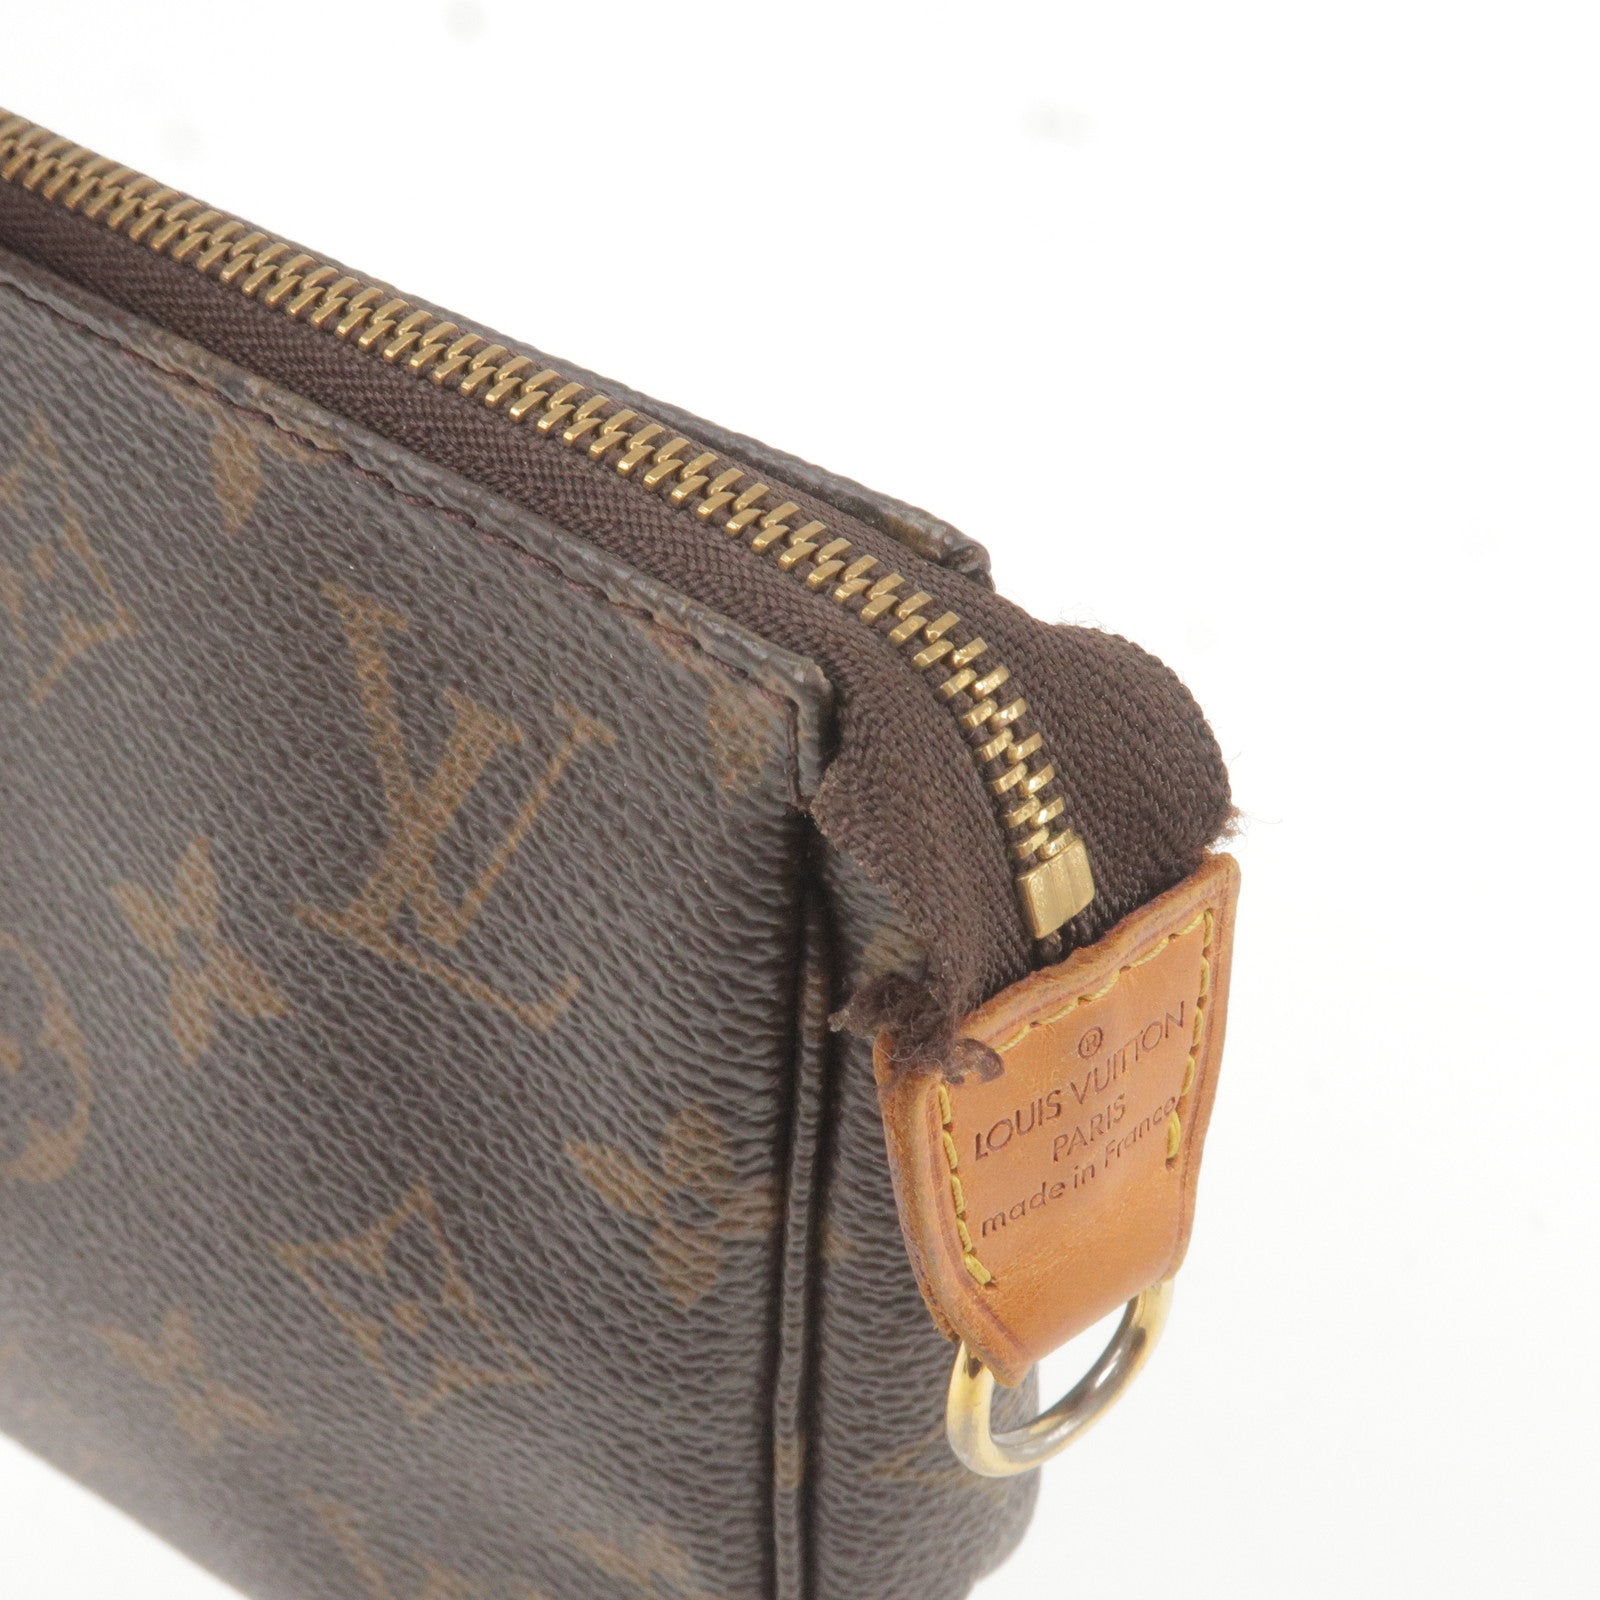 Made in France, purchased in France (Paris) Louis Vuitton monogram cles  (key pouch)